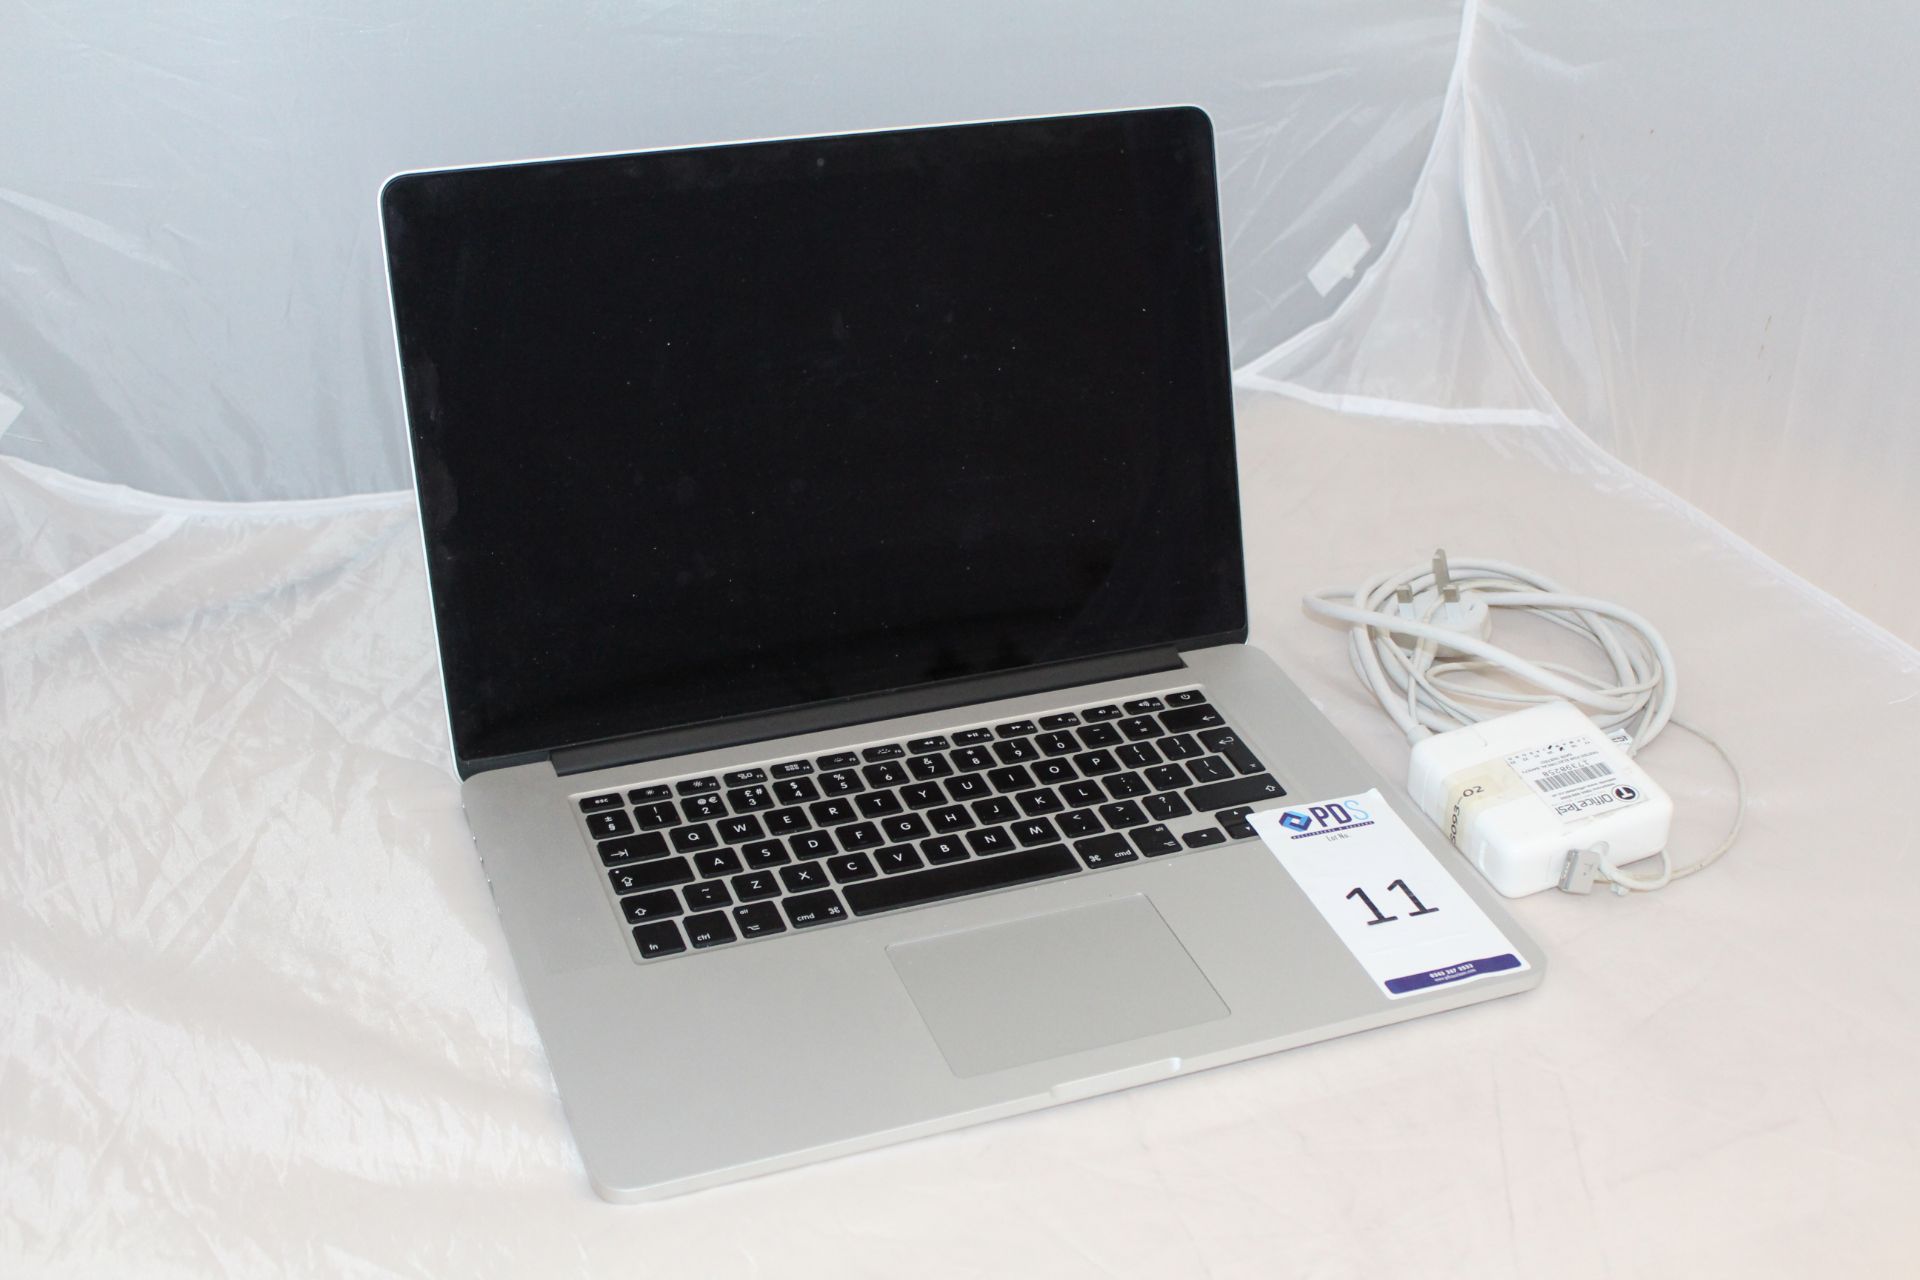 Apple MacBook Pro A1398, Serial Number CO2M20P8FD56 with Charger